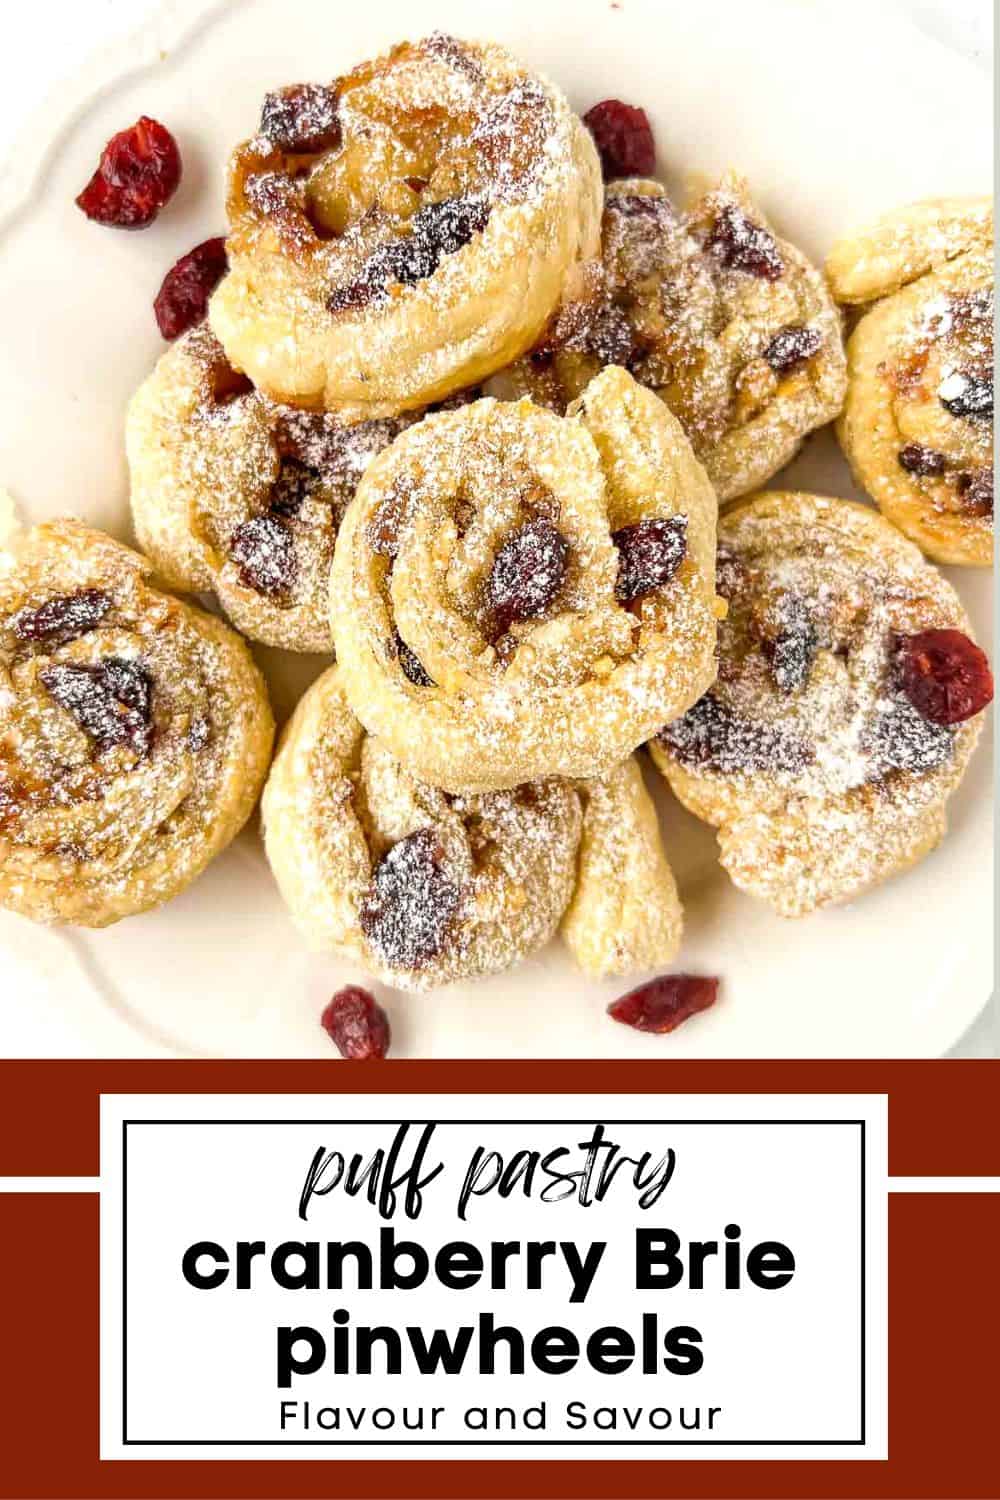 Image with text for puff pastry cranberry brie pinwheels.